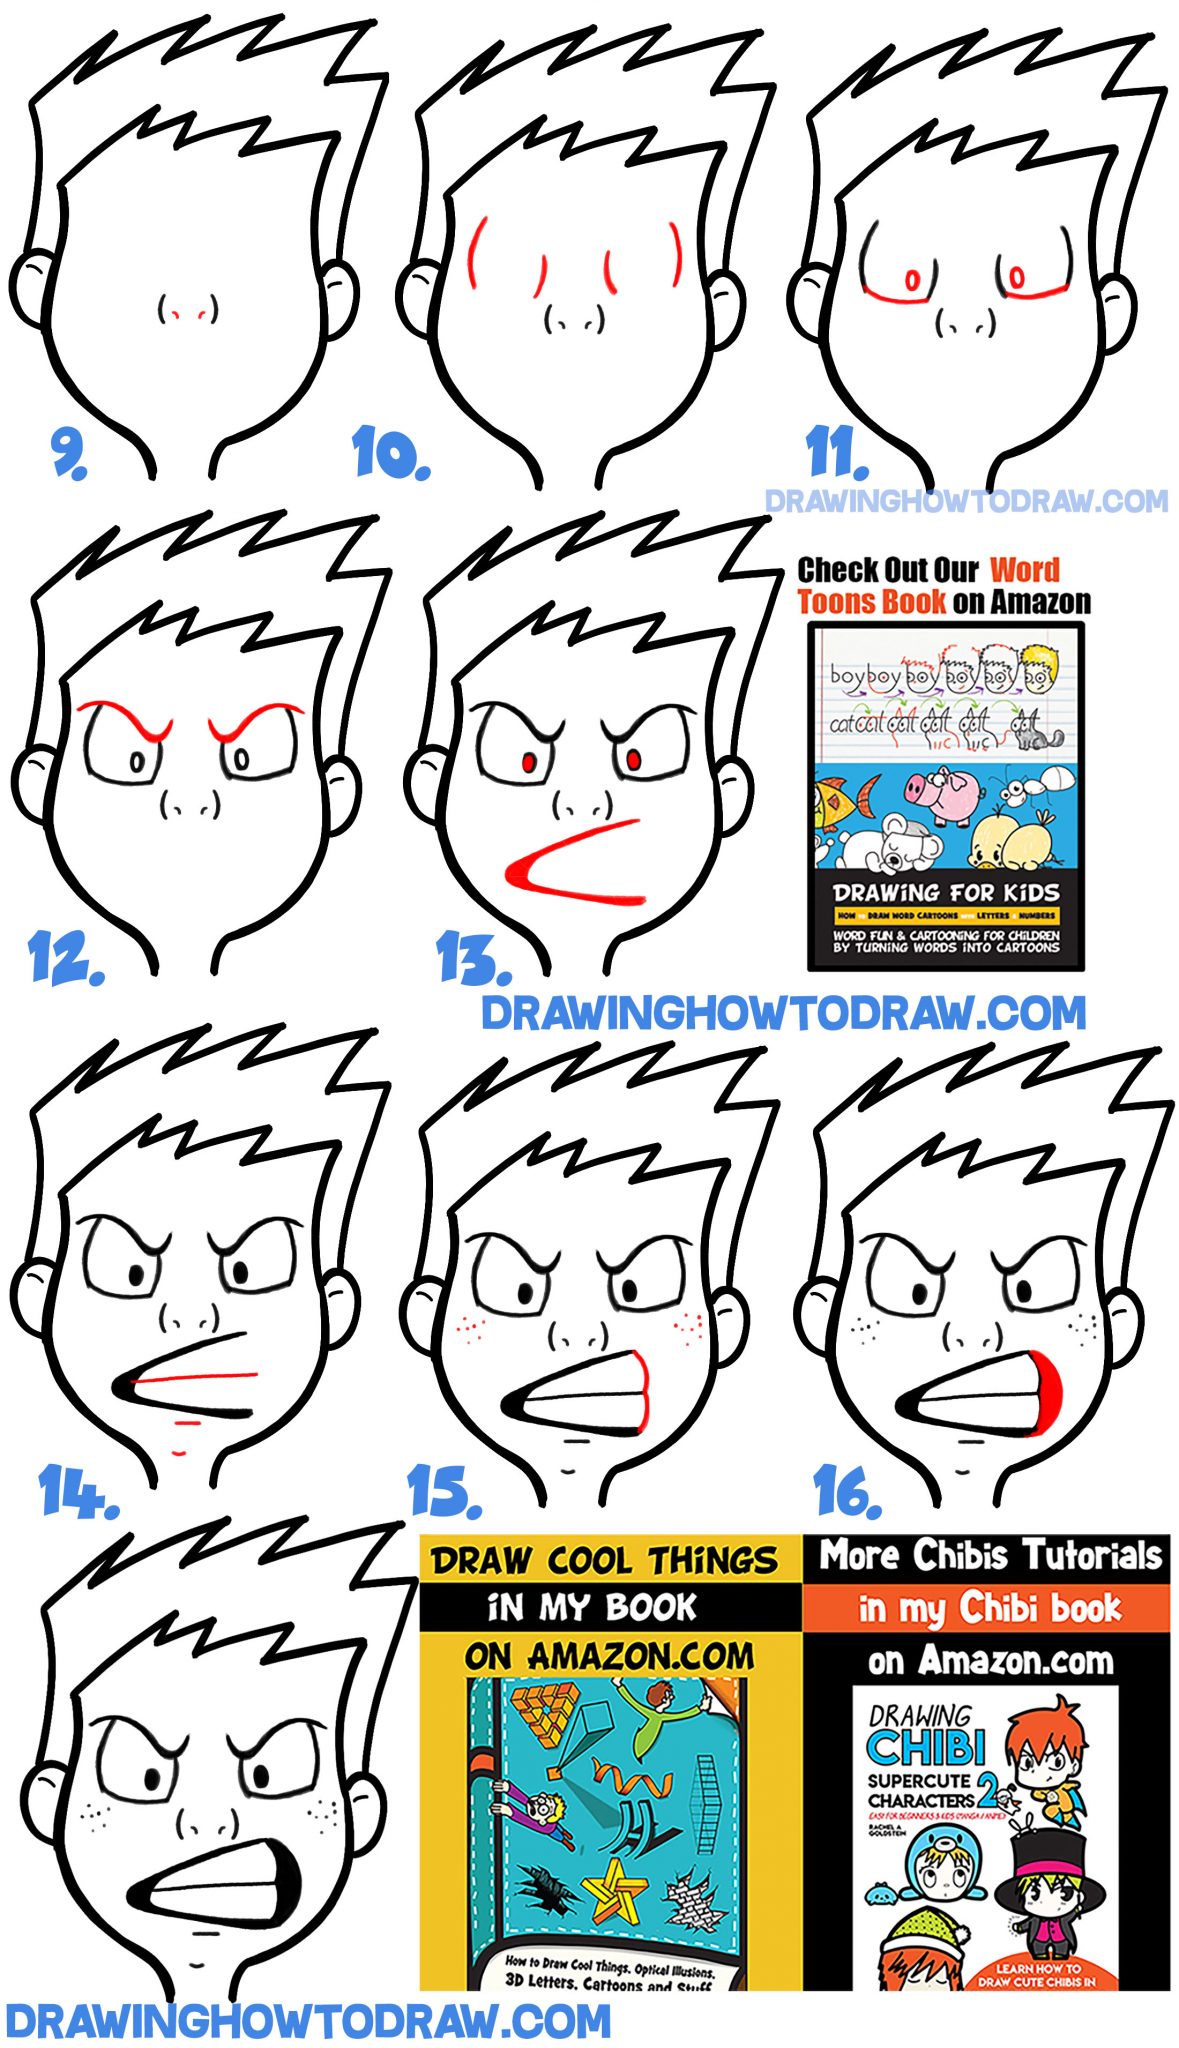 How to Draw Cartoon Facial Expressions : Angry, Furious, Mad - How to ...